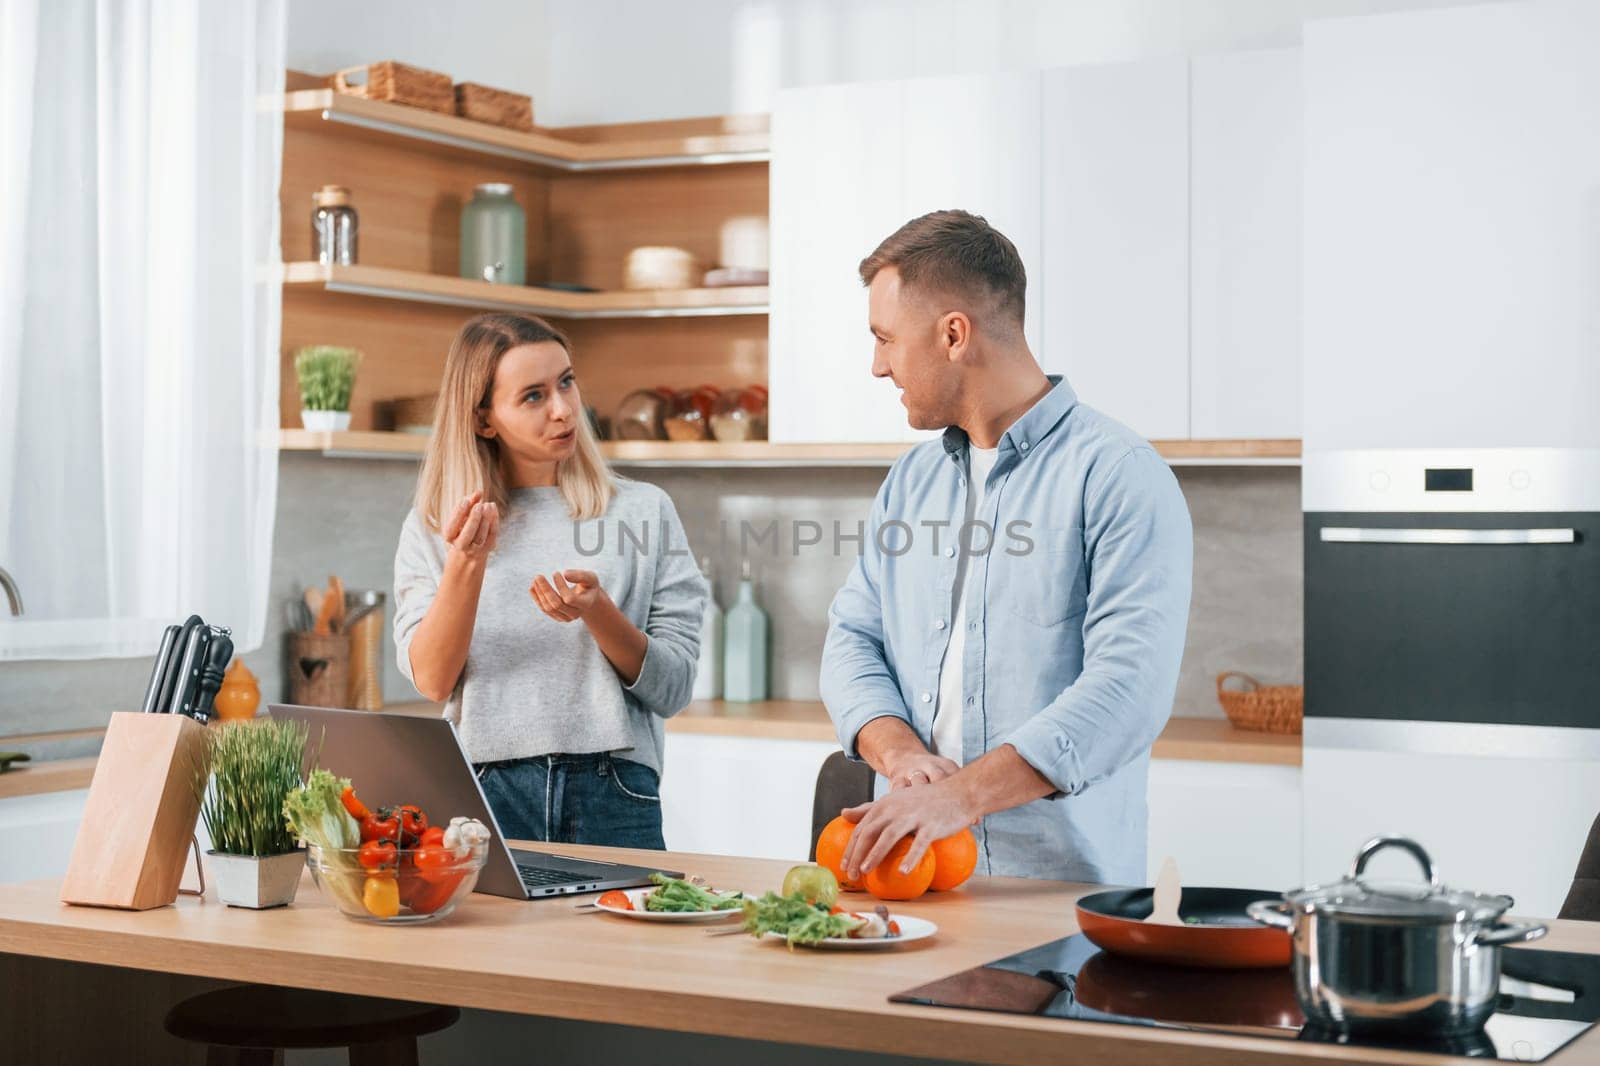 Having weekend together. Couple preparing food at home on the modern kitchen.